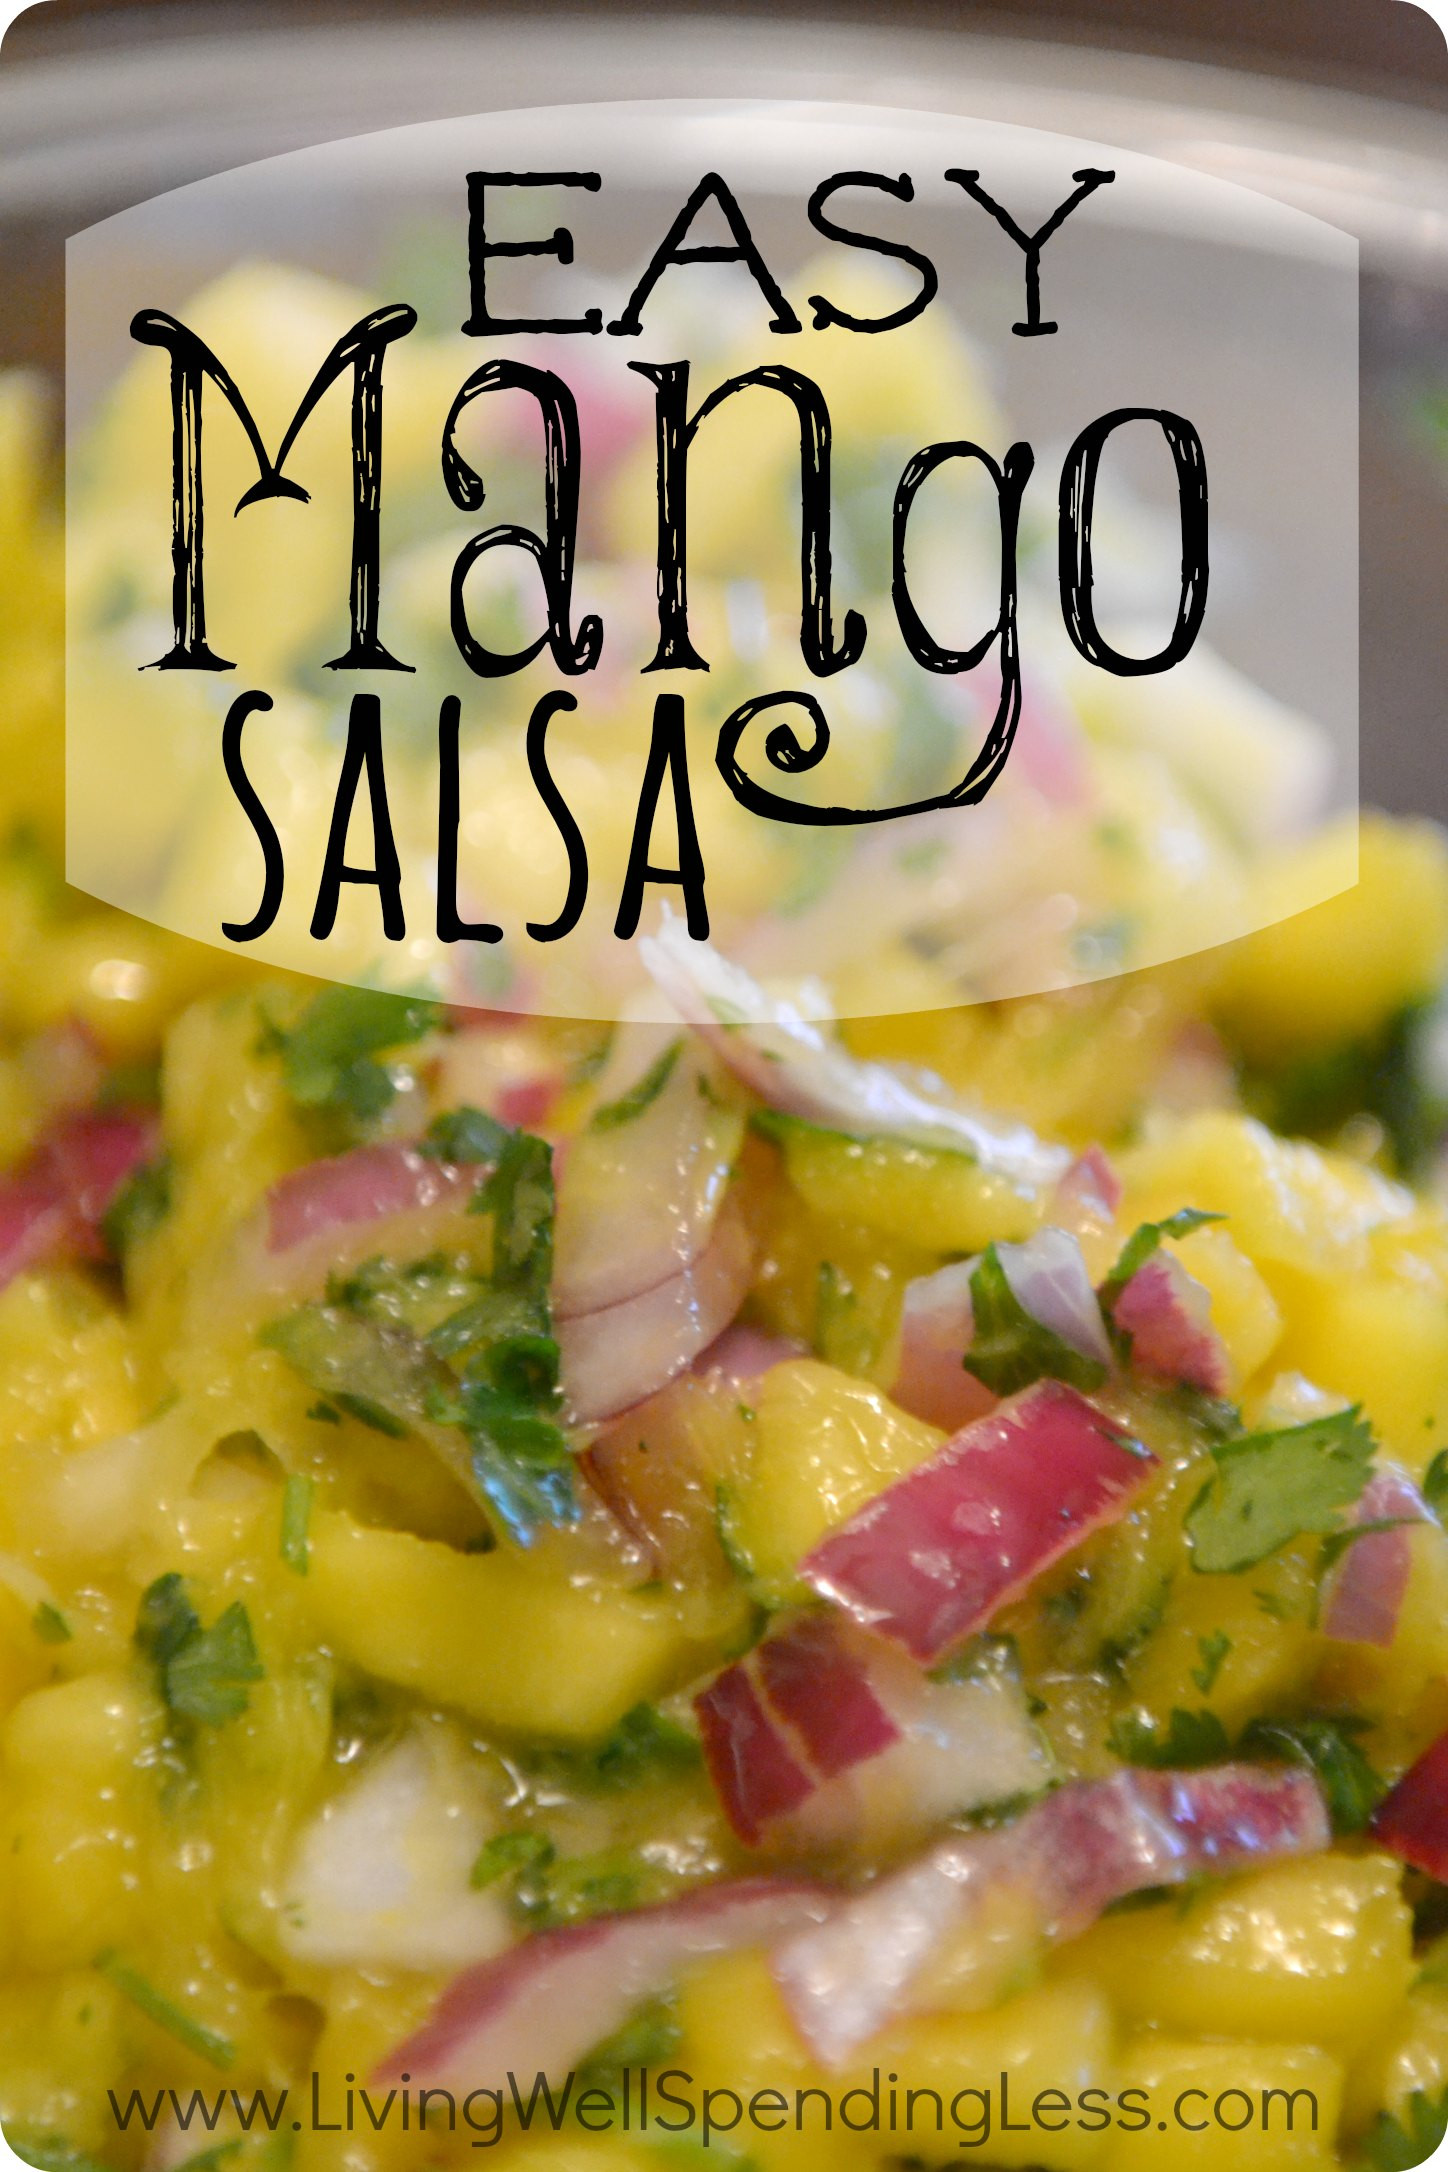 Easy Mango Salsa Recipe For Fish
 Easy Mango Salsa ly 4 ingre nts Awesome on fish